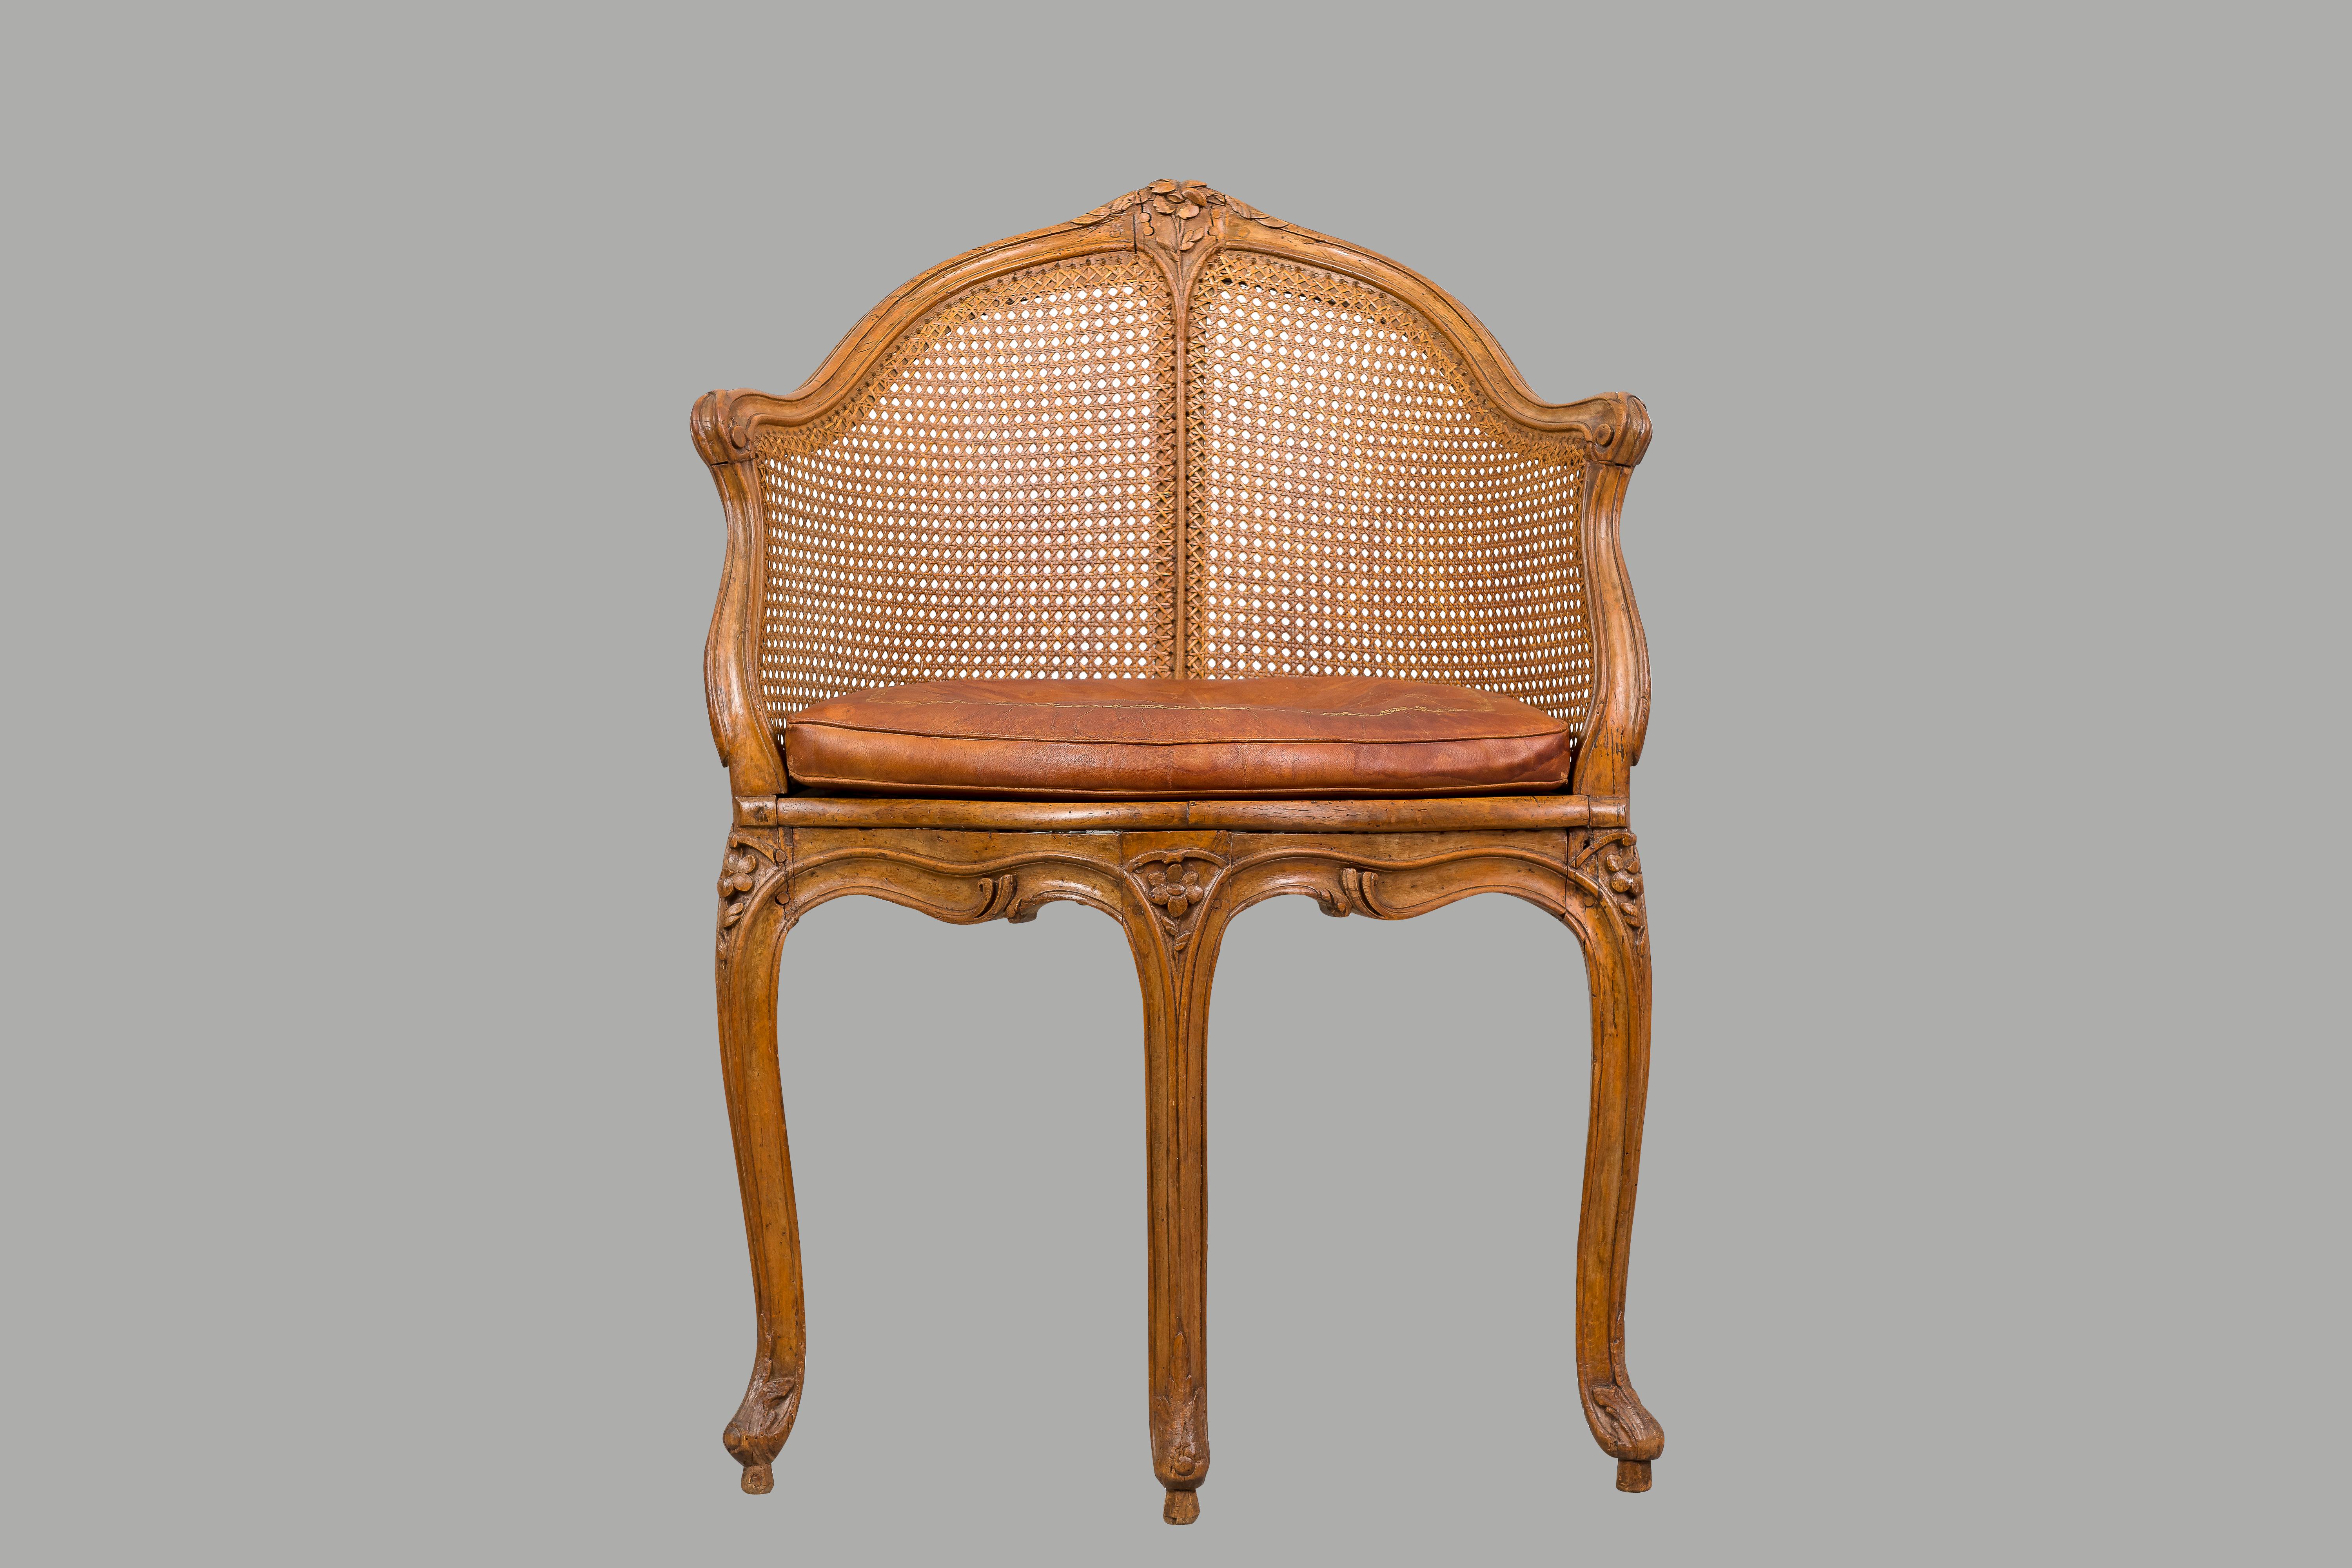 A Louis XV period beechwood and cane fauteuil de bureau, the curved crestrail with a carved central rosette terminating in molded downswept arms above a shaped seat resting on molded cabriole legs. Retains an antique tooled leather cushion, circa